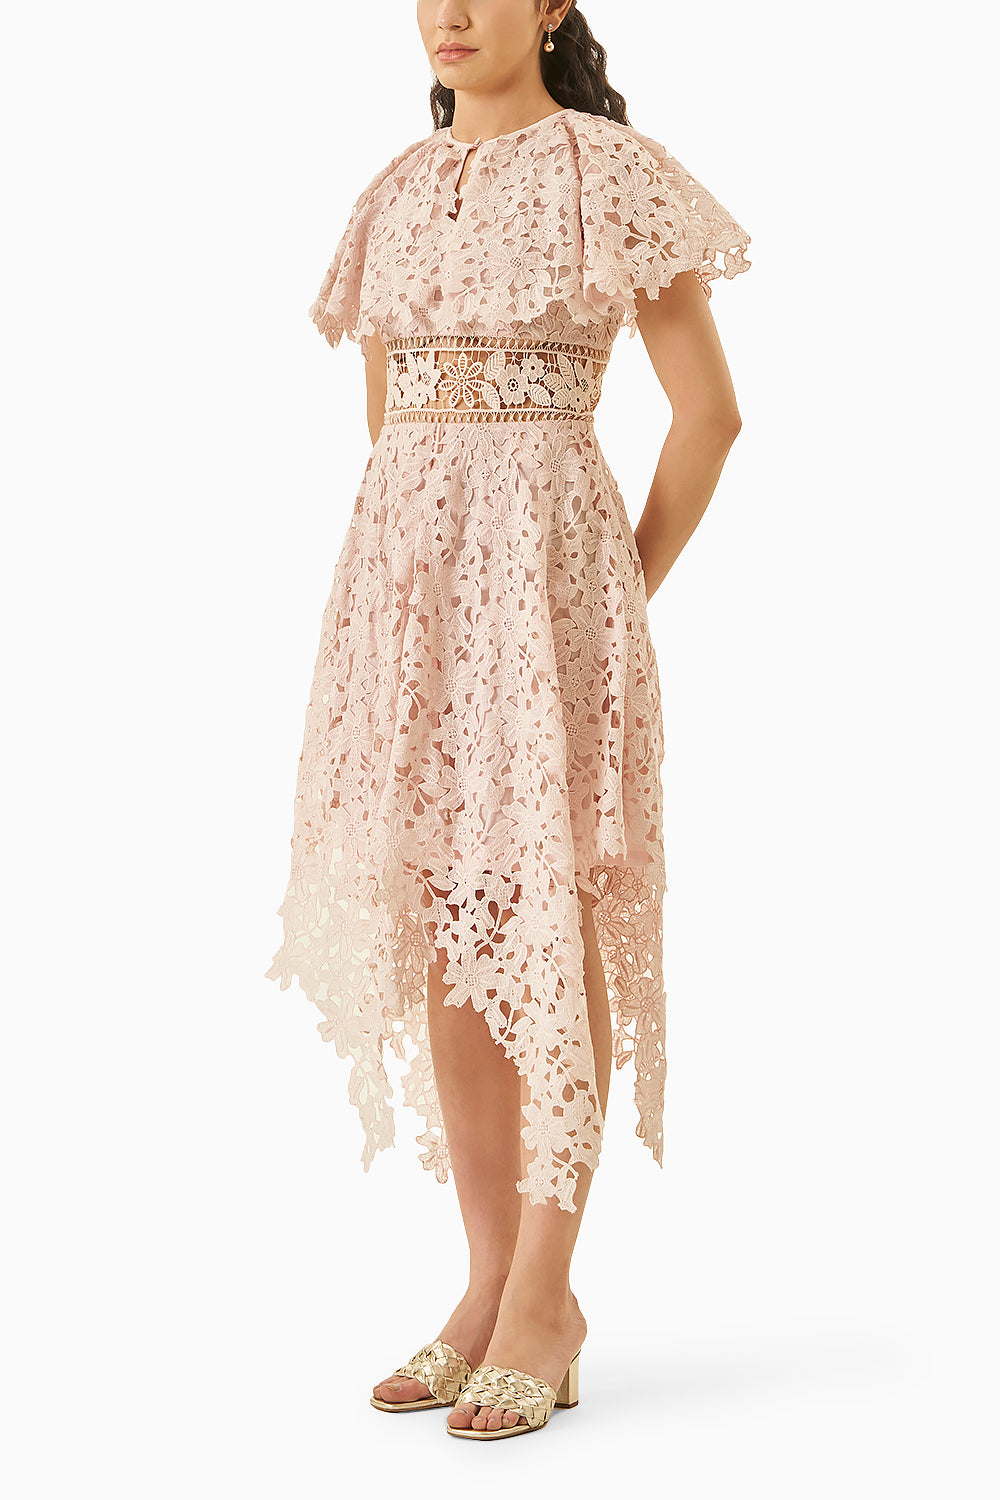 Baby Pink Chemical Lace Dress